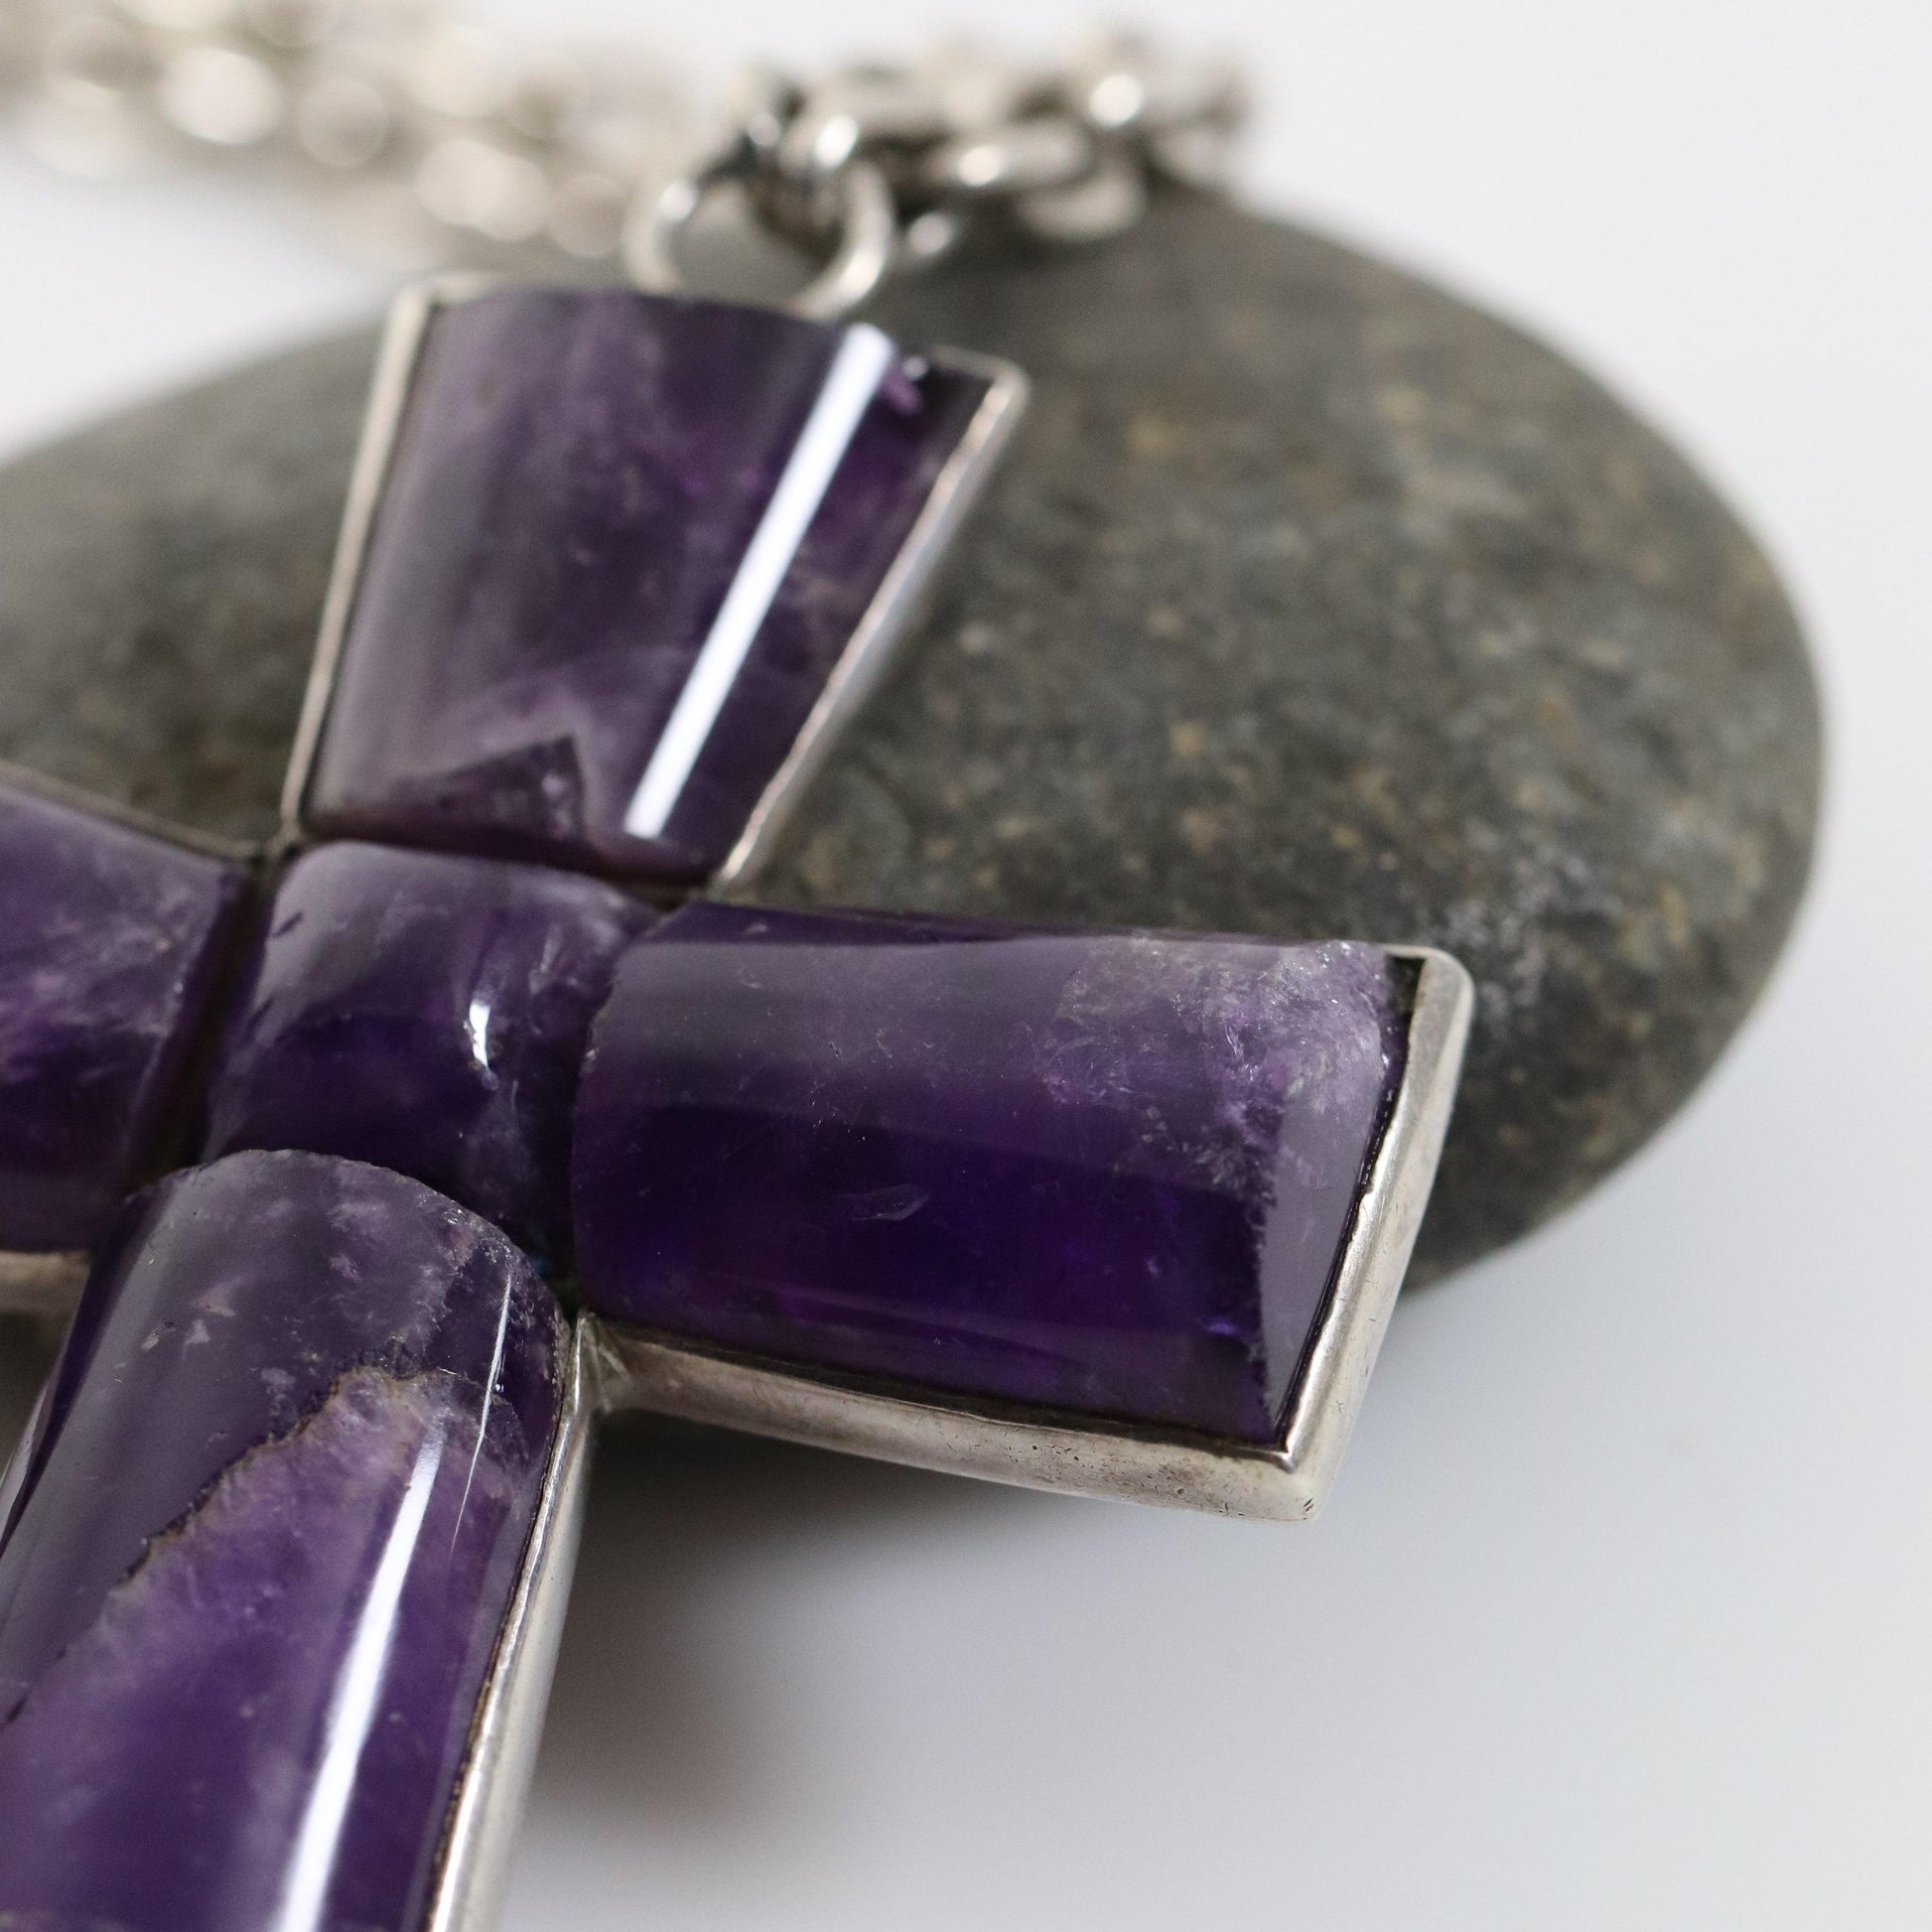 Vintage Taxco William Spratling Jewelry | Amethyst Cross with Handcrafted Chain - Carmel Fine Silver Jewelry